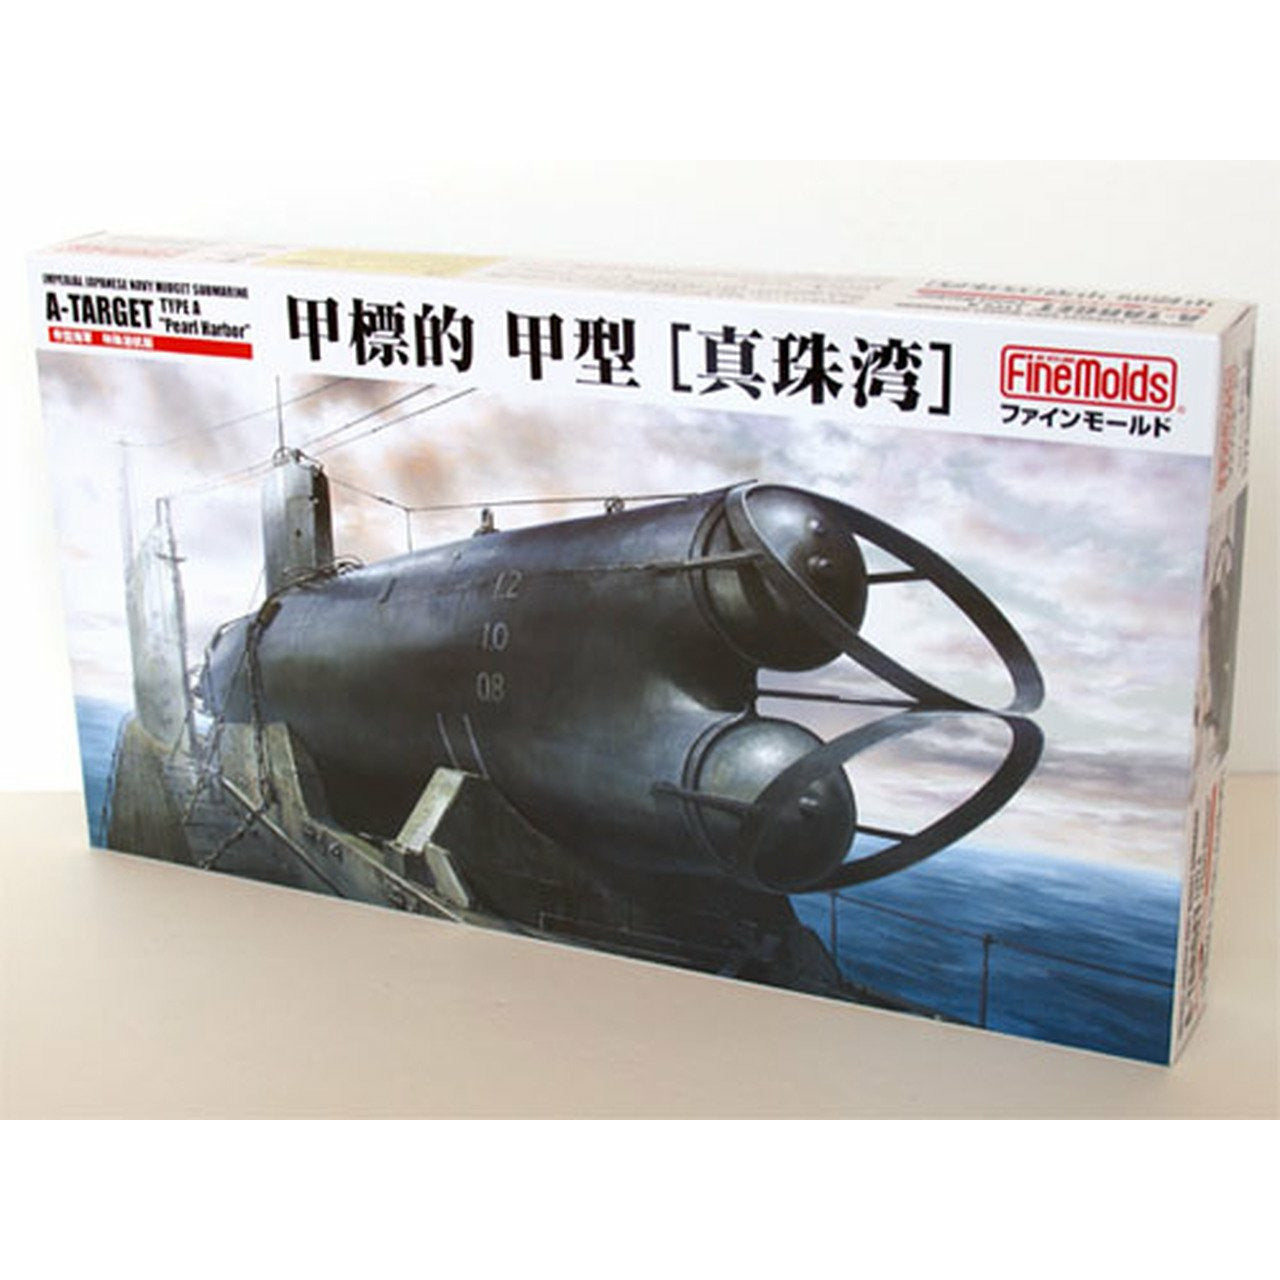 A Target Type A IJN Midget Submarine 1/72 by Model Kit #FS2 by AFV